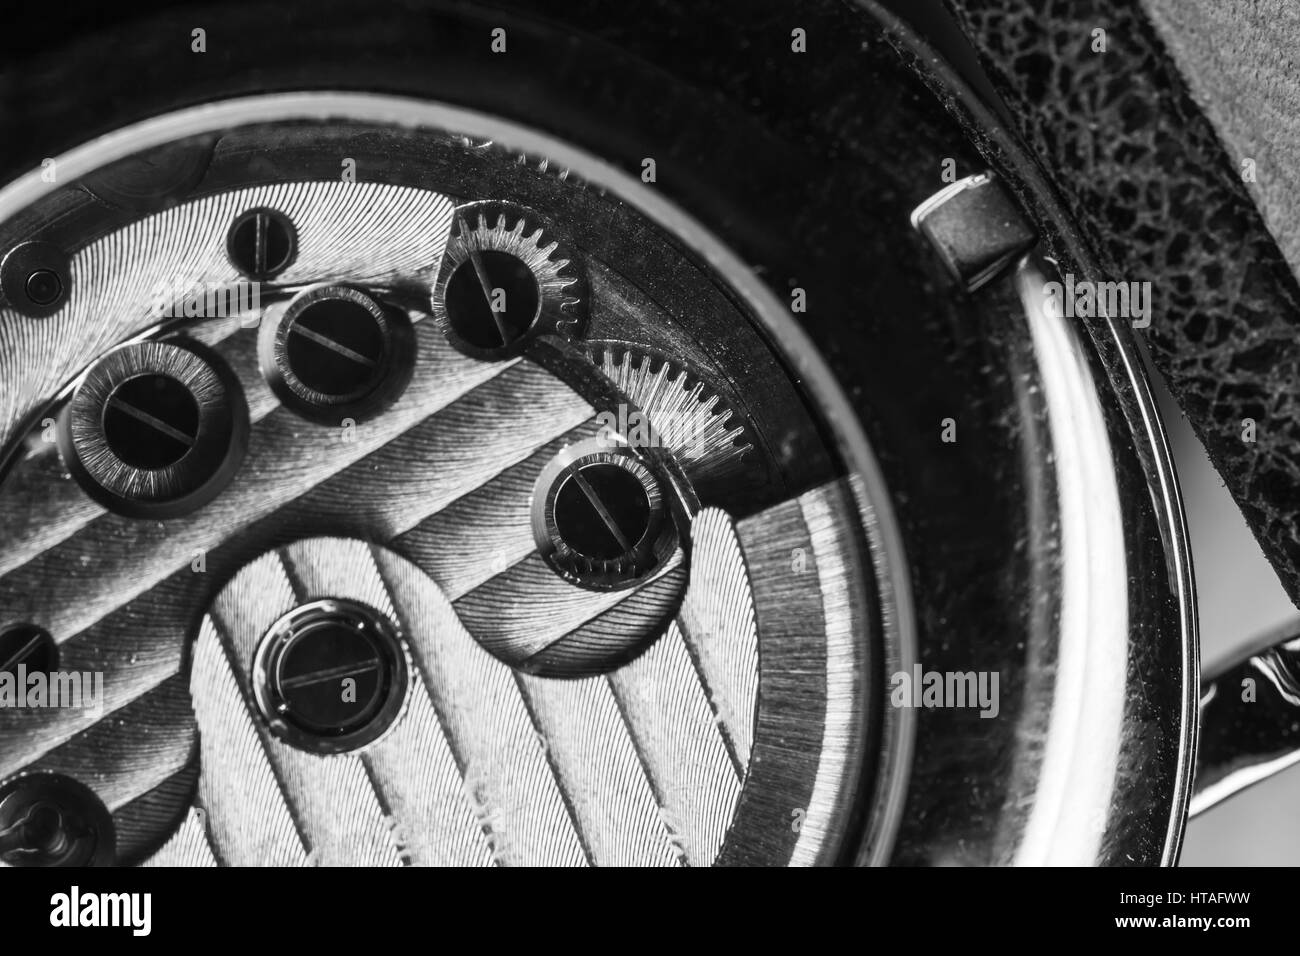 Mechanical men wrist watch with automatic winding, close-up fragment of open back side with self-winding mechanism details, black and white Stock Photo